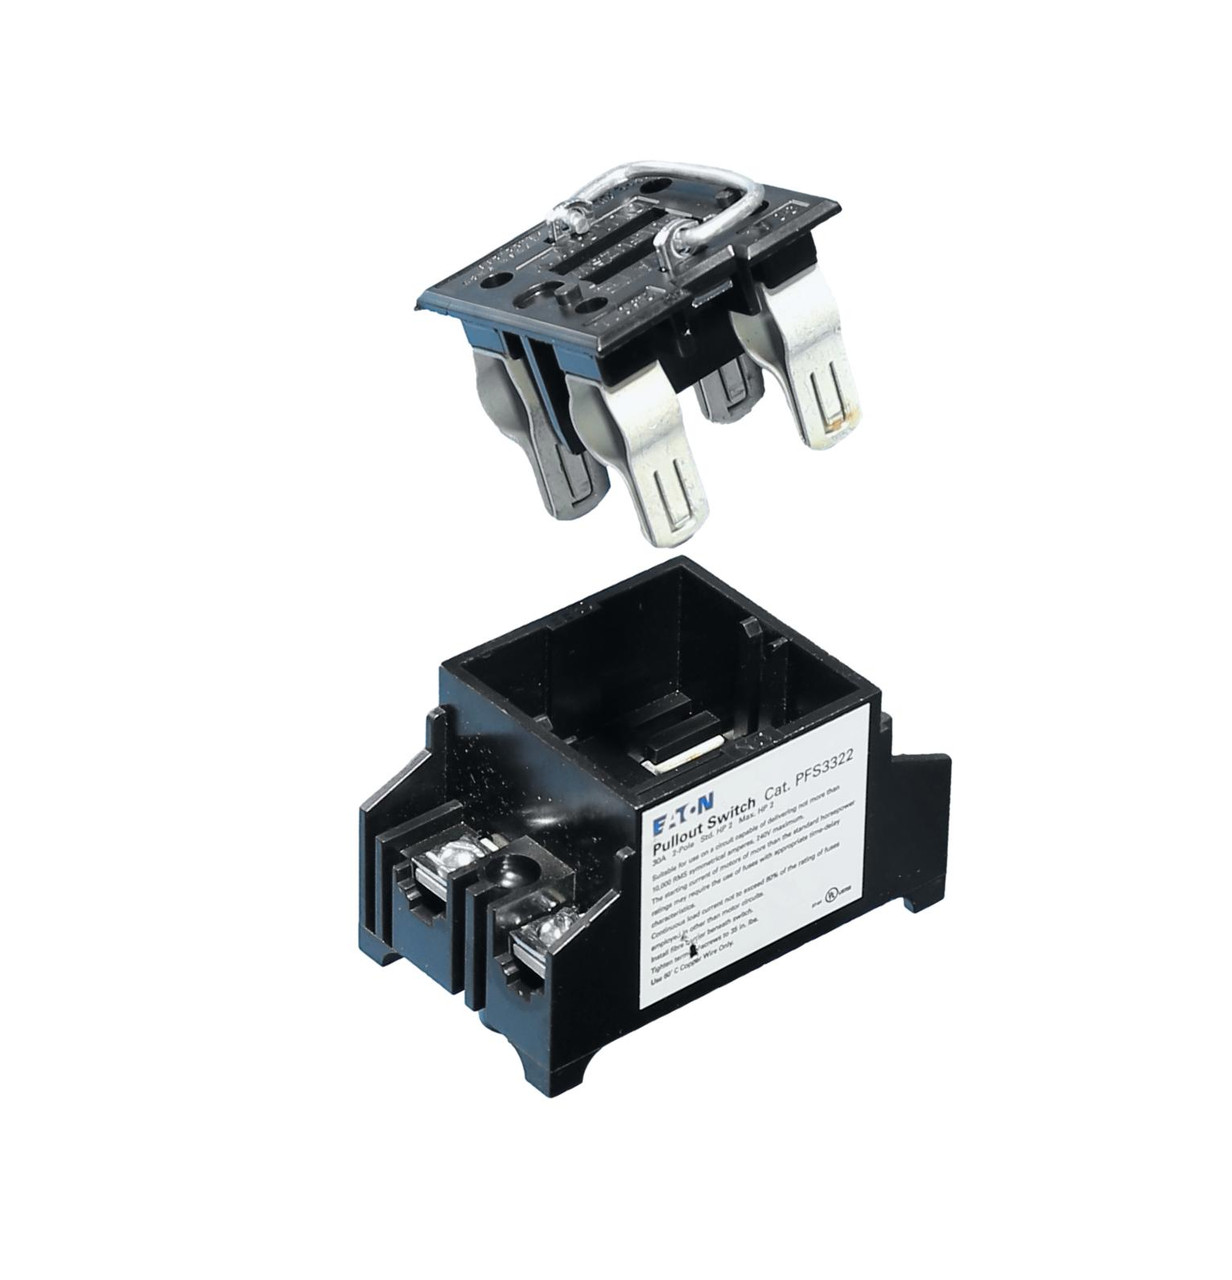 PFS3322
Eaton Pull-Out Switch